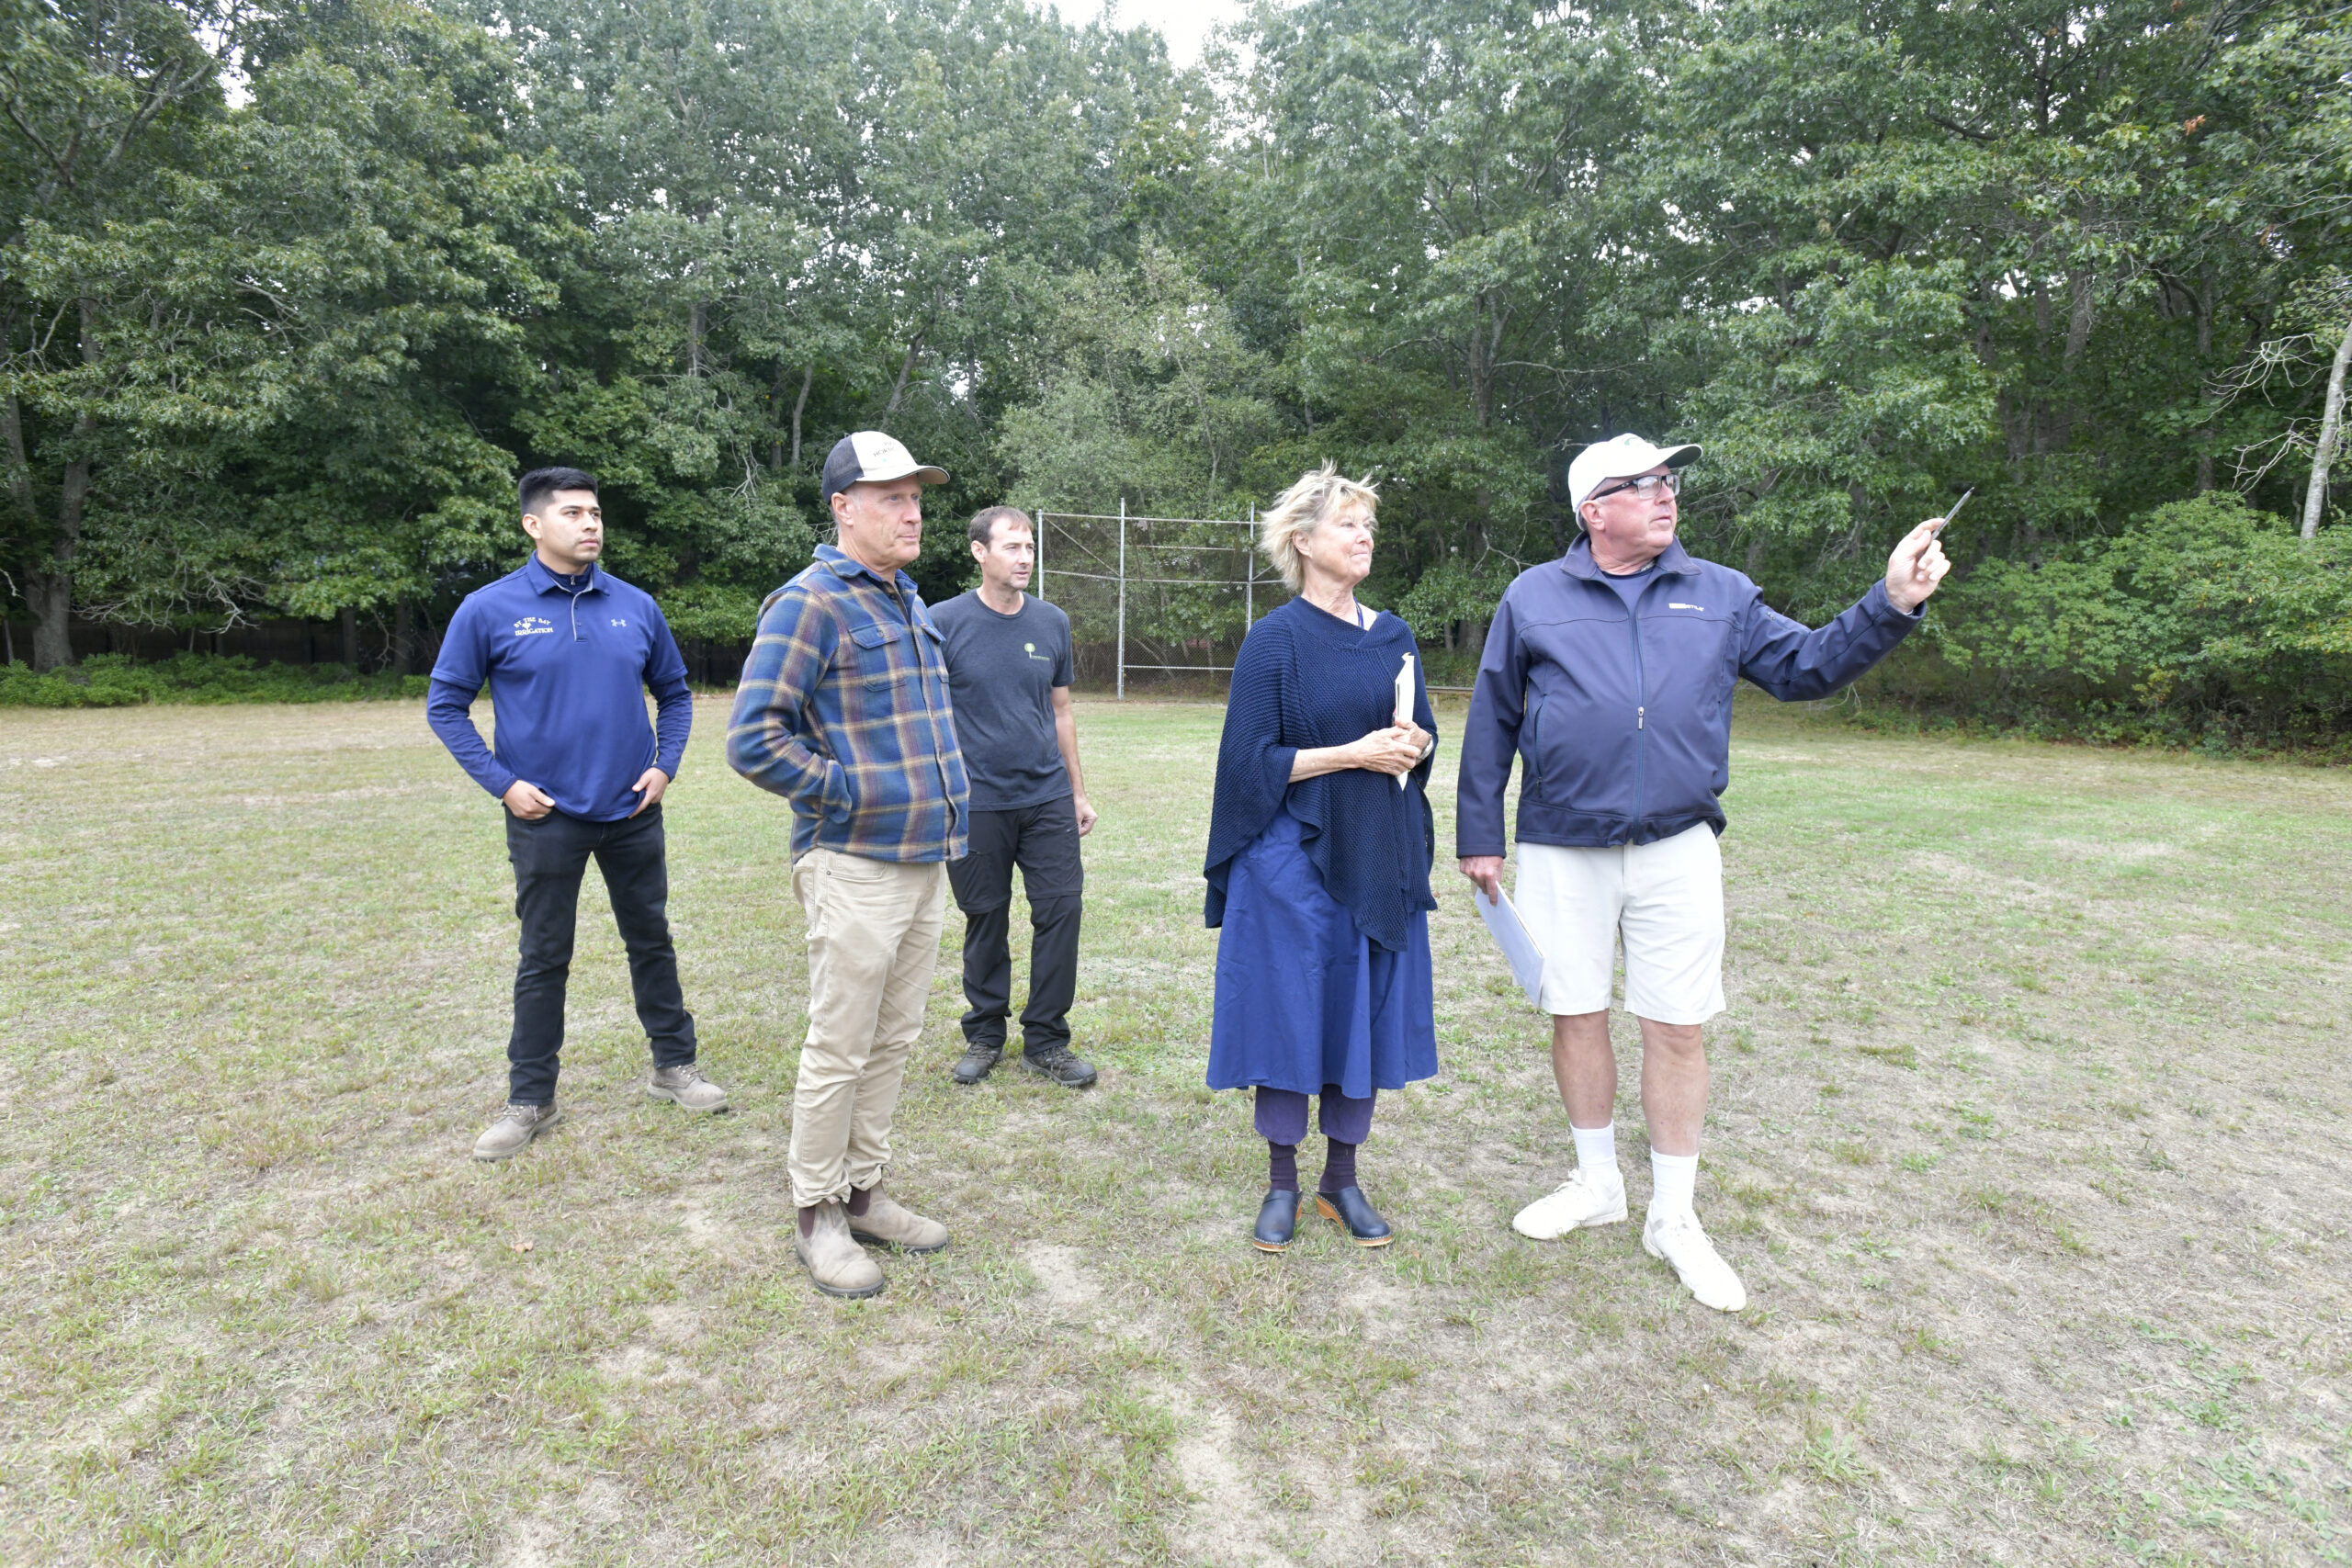 Gustavo Gonzalez, Tony Piazza, Paul Wagner, Edwina vol Gal and Douglas DeGroot on the field at the Bridgehampton Child Care and Recreational Center on Friday.  DANA SHAW